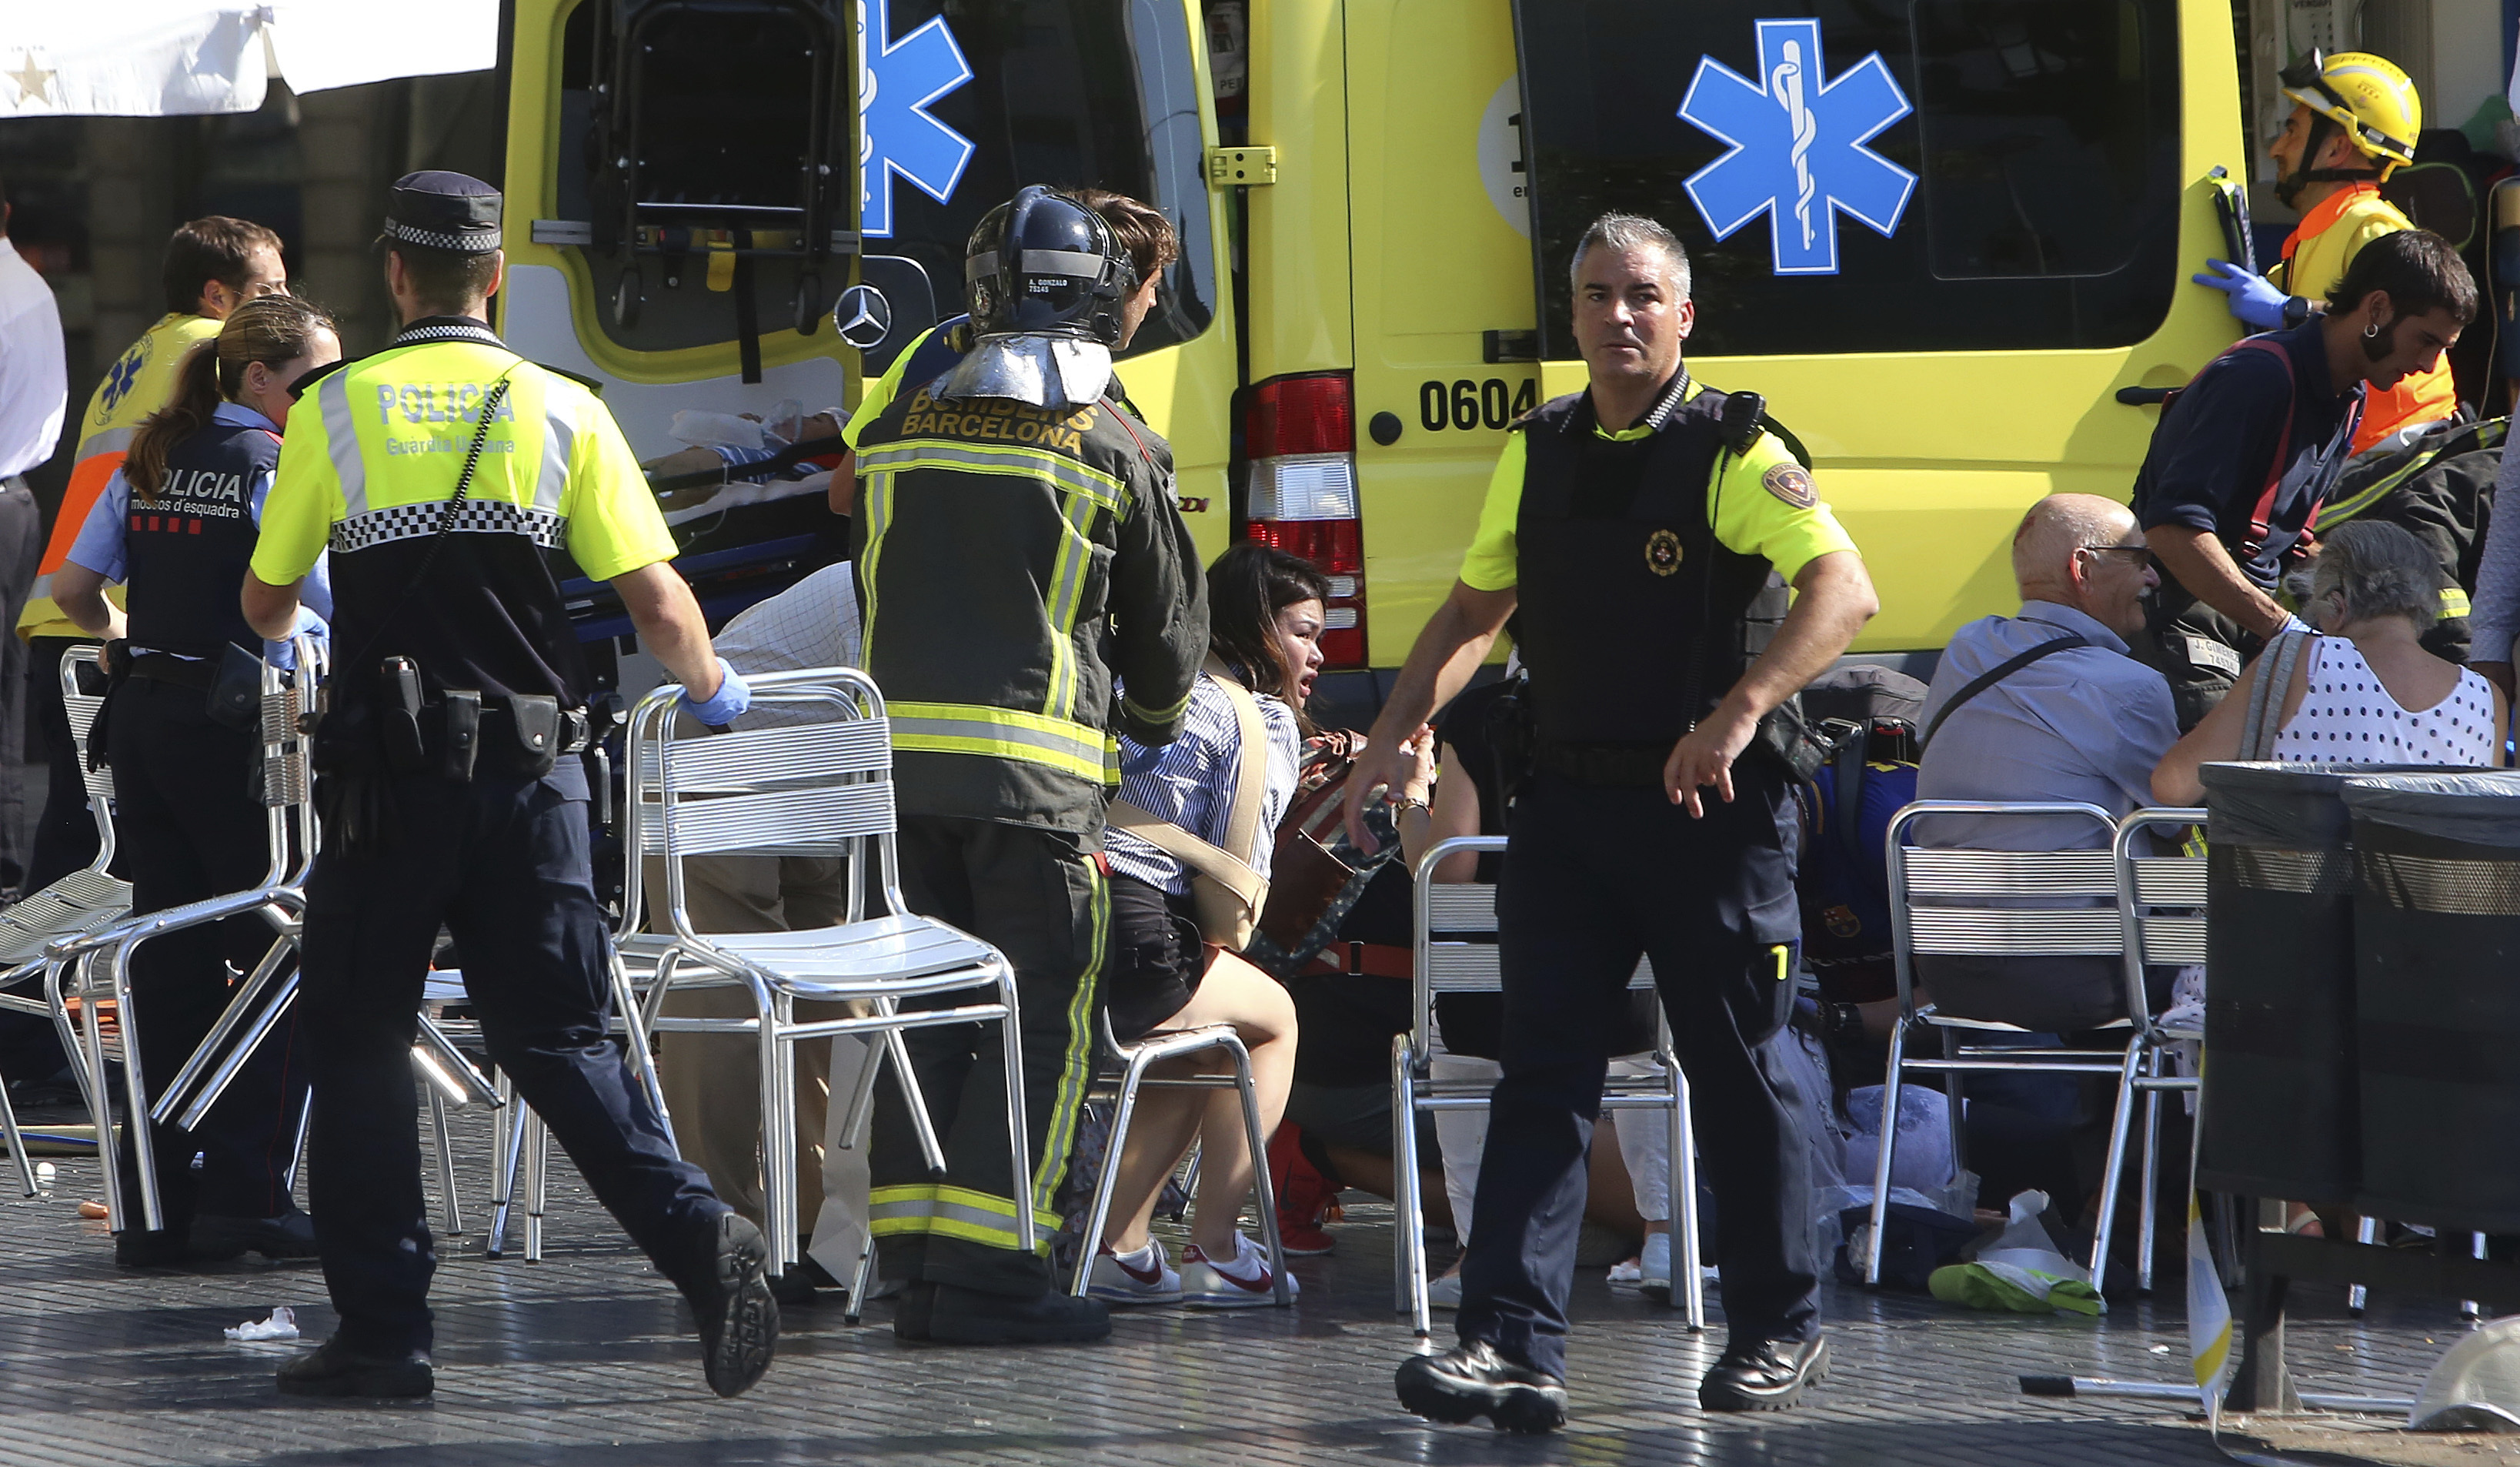 Injured people are tended to by emergency services